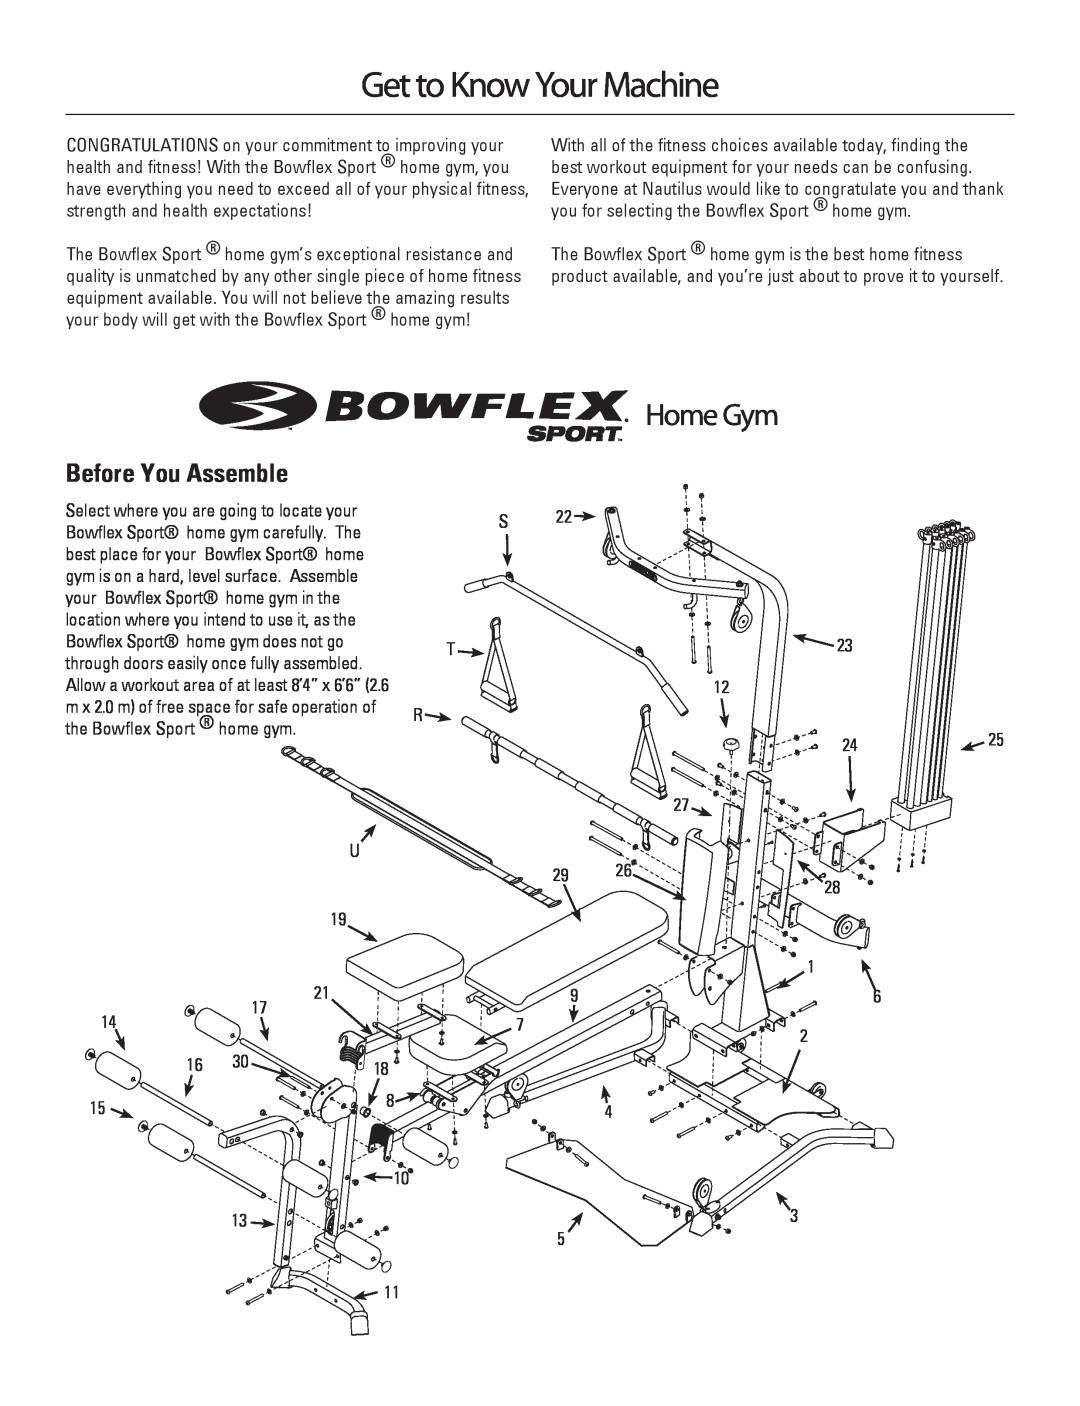 Bowflex 001-6961 manual Get to Know Your Machine, Home Gym, Before You Assemble 